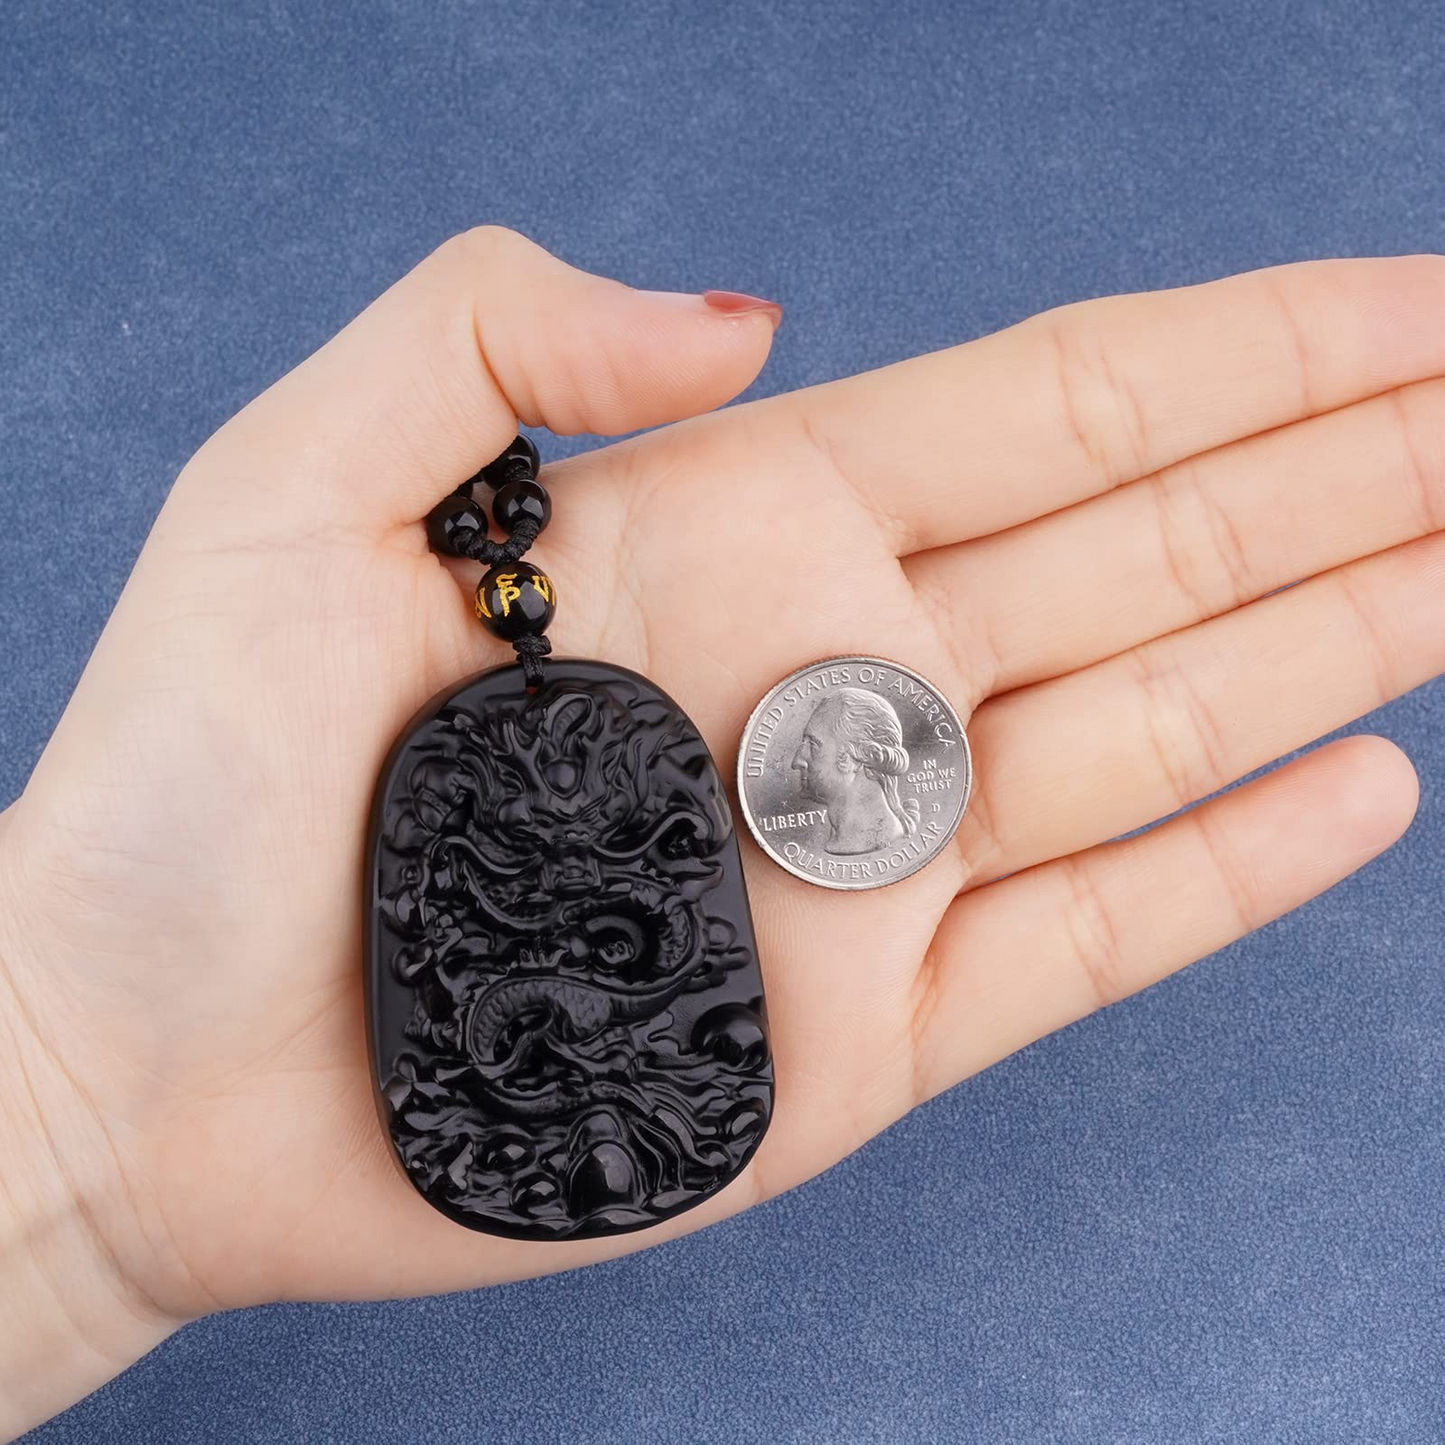 Black Obsidian Chinese Dragon Necklace-Attract Protection And Fortune - ourlovejewelry